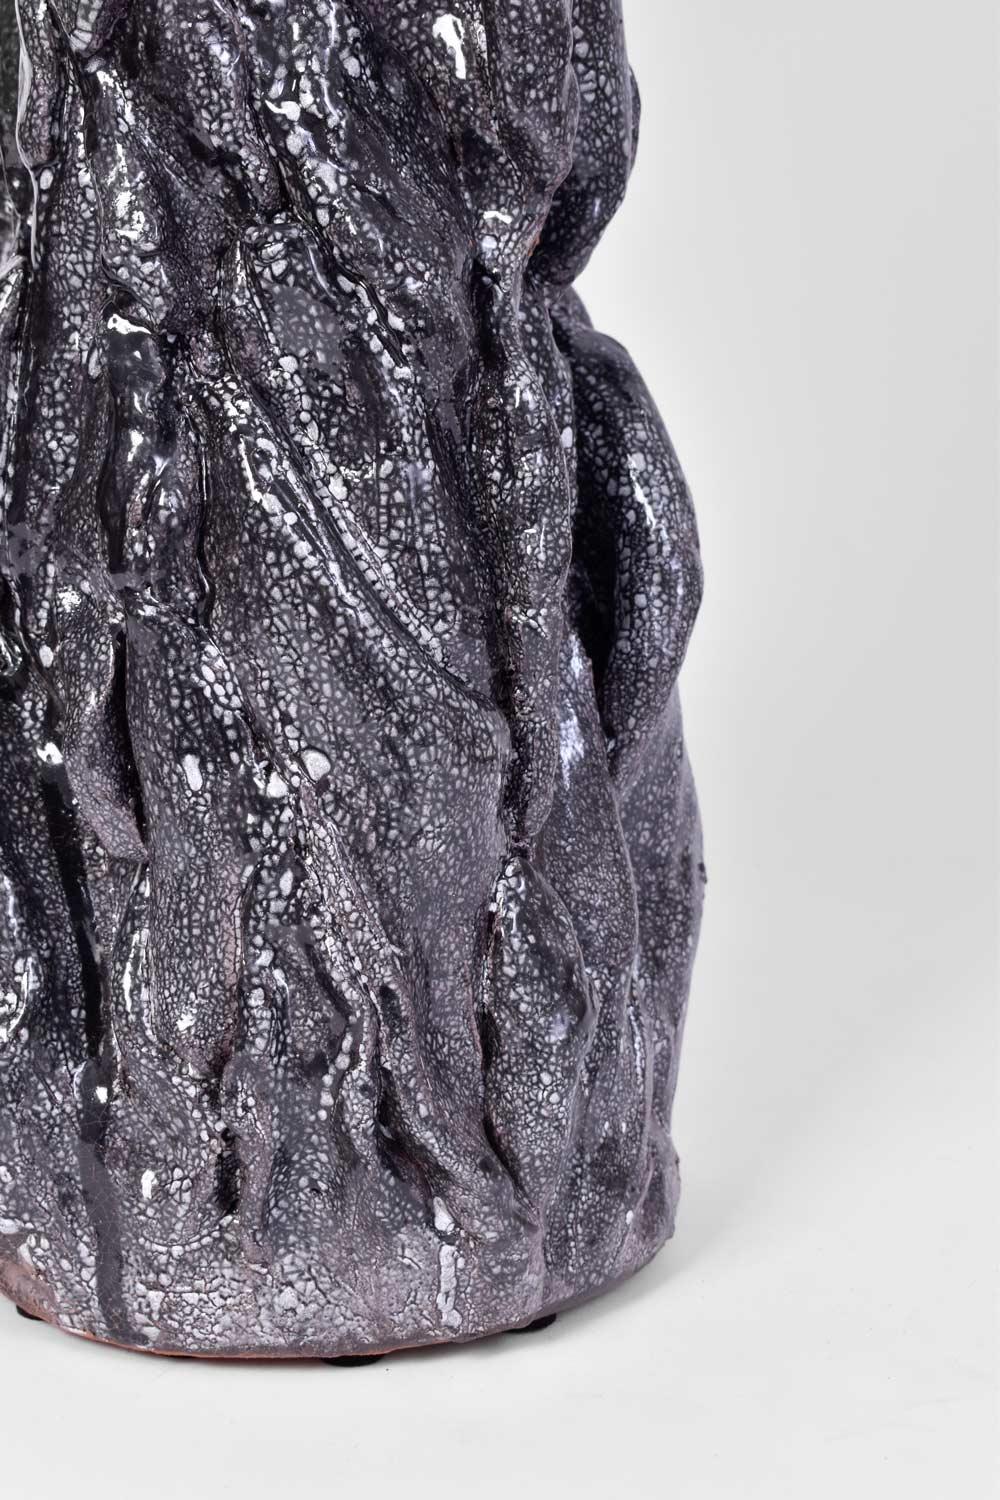 Helder grey ceramic lamp with an organic texture. Portugal, 2023.